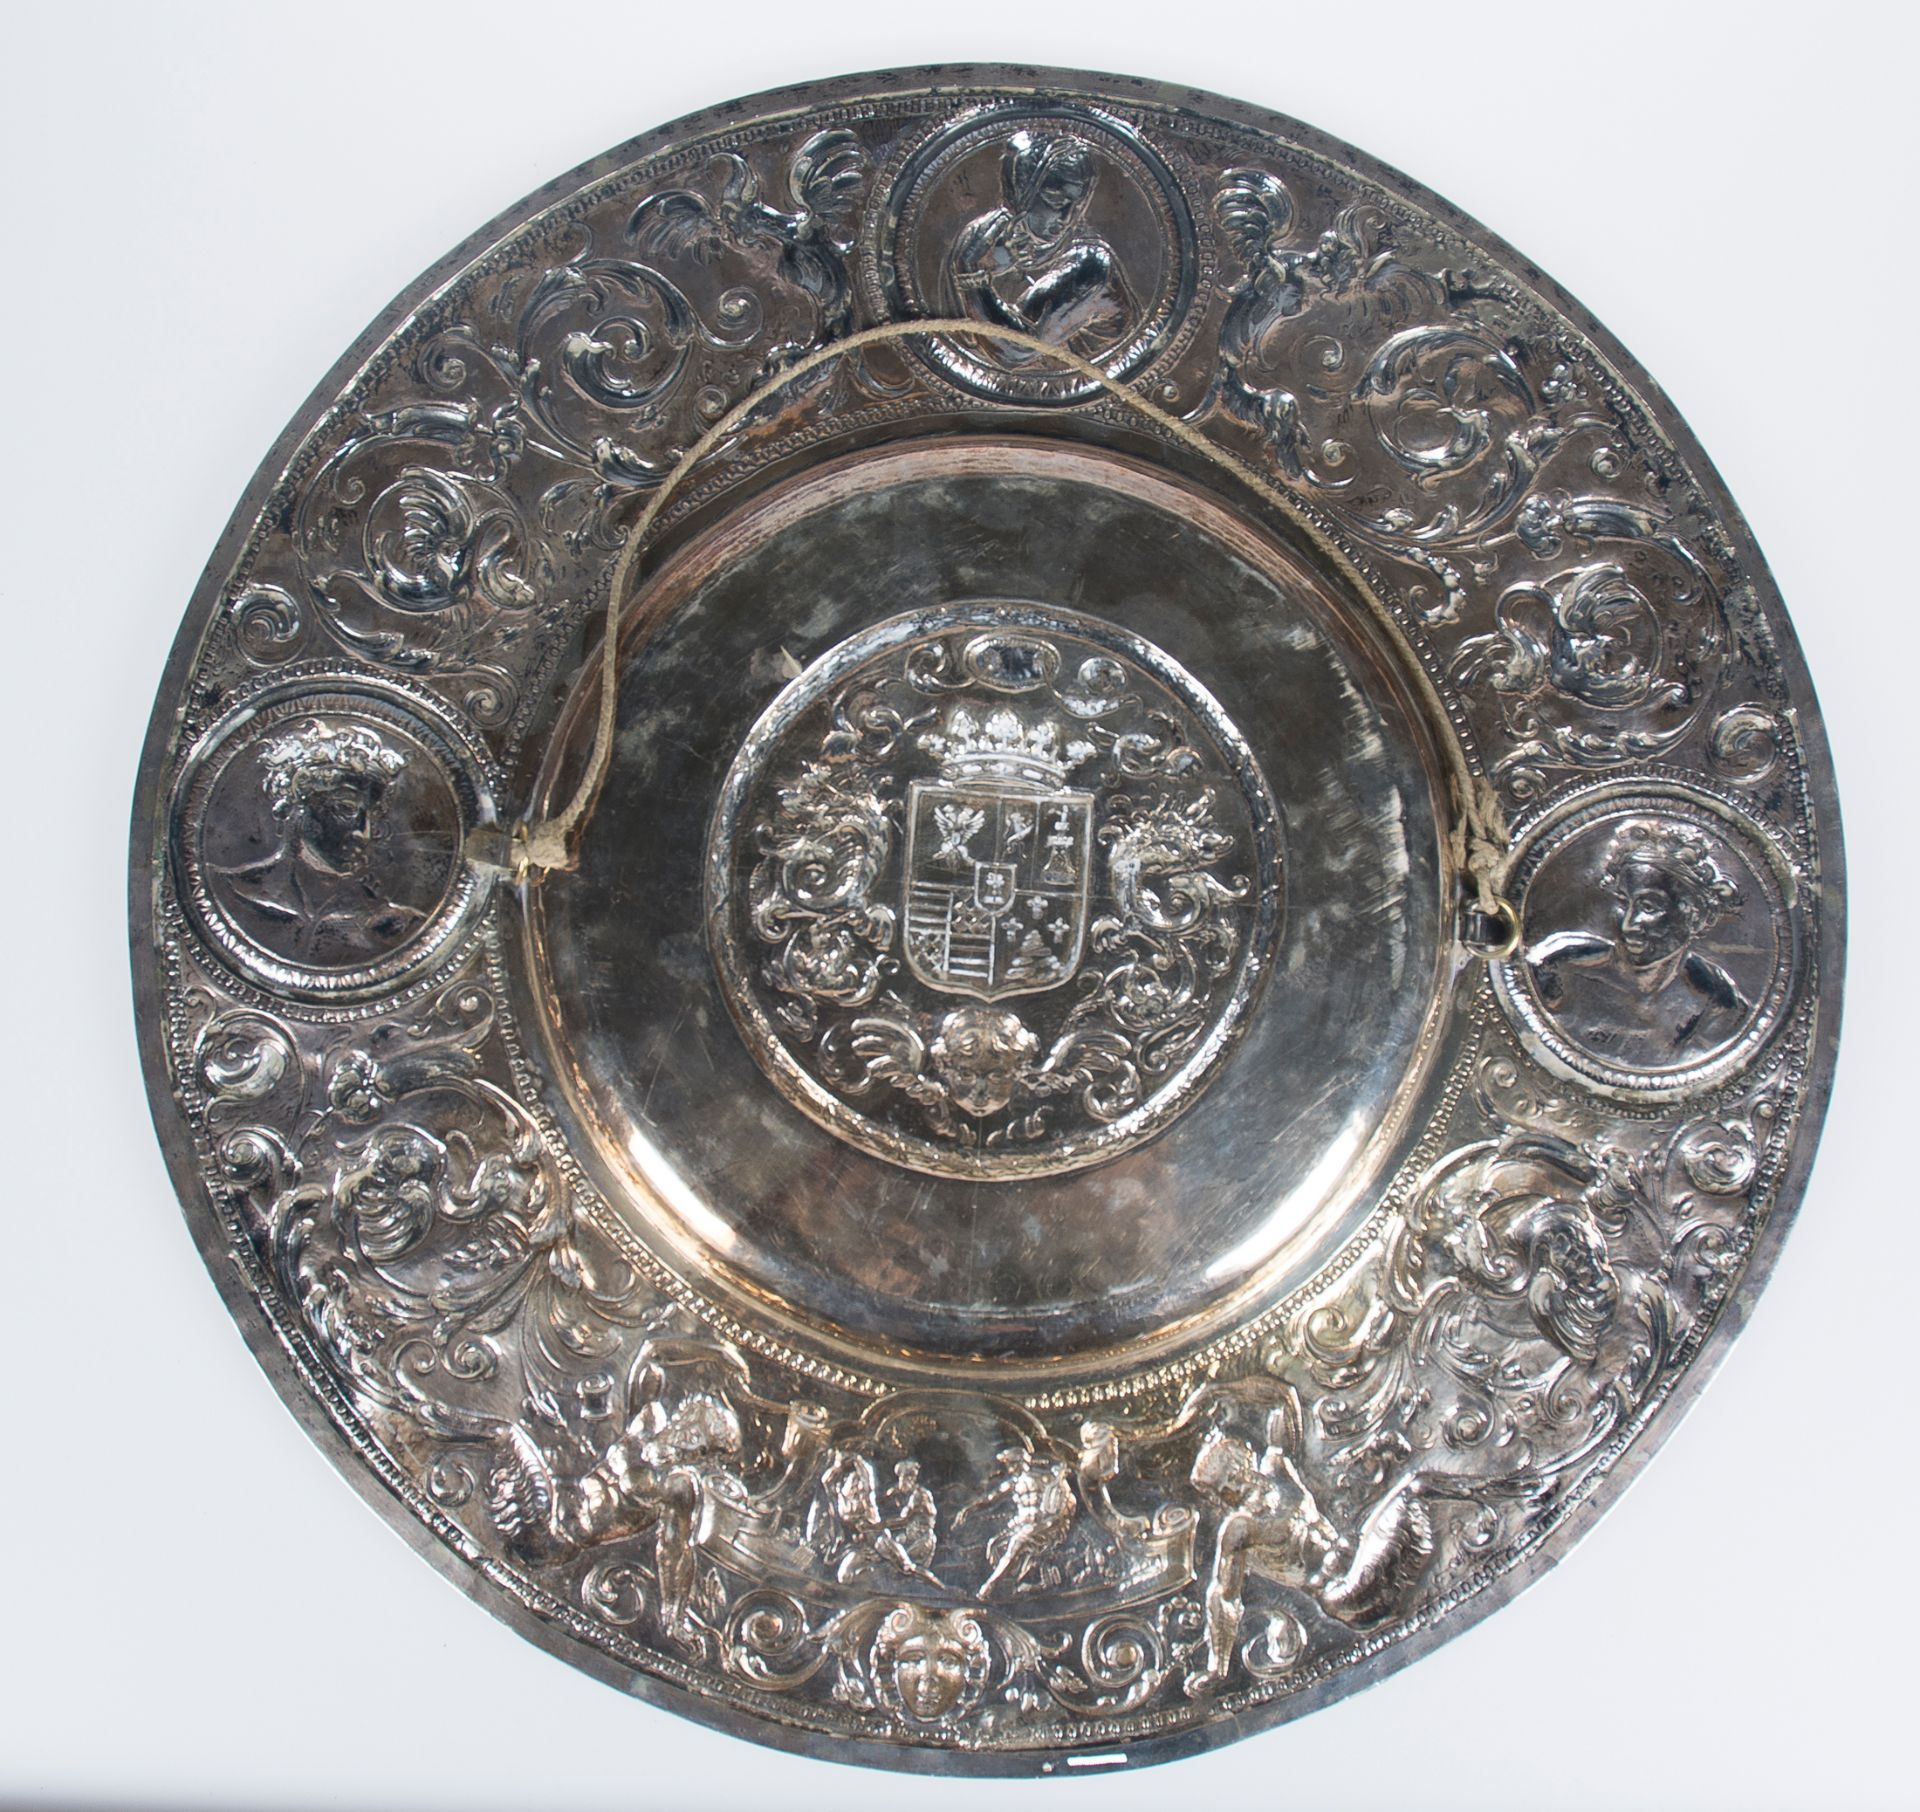 Large, embossed and chased silver plate. 19th century. - Image 6 of 7